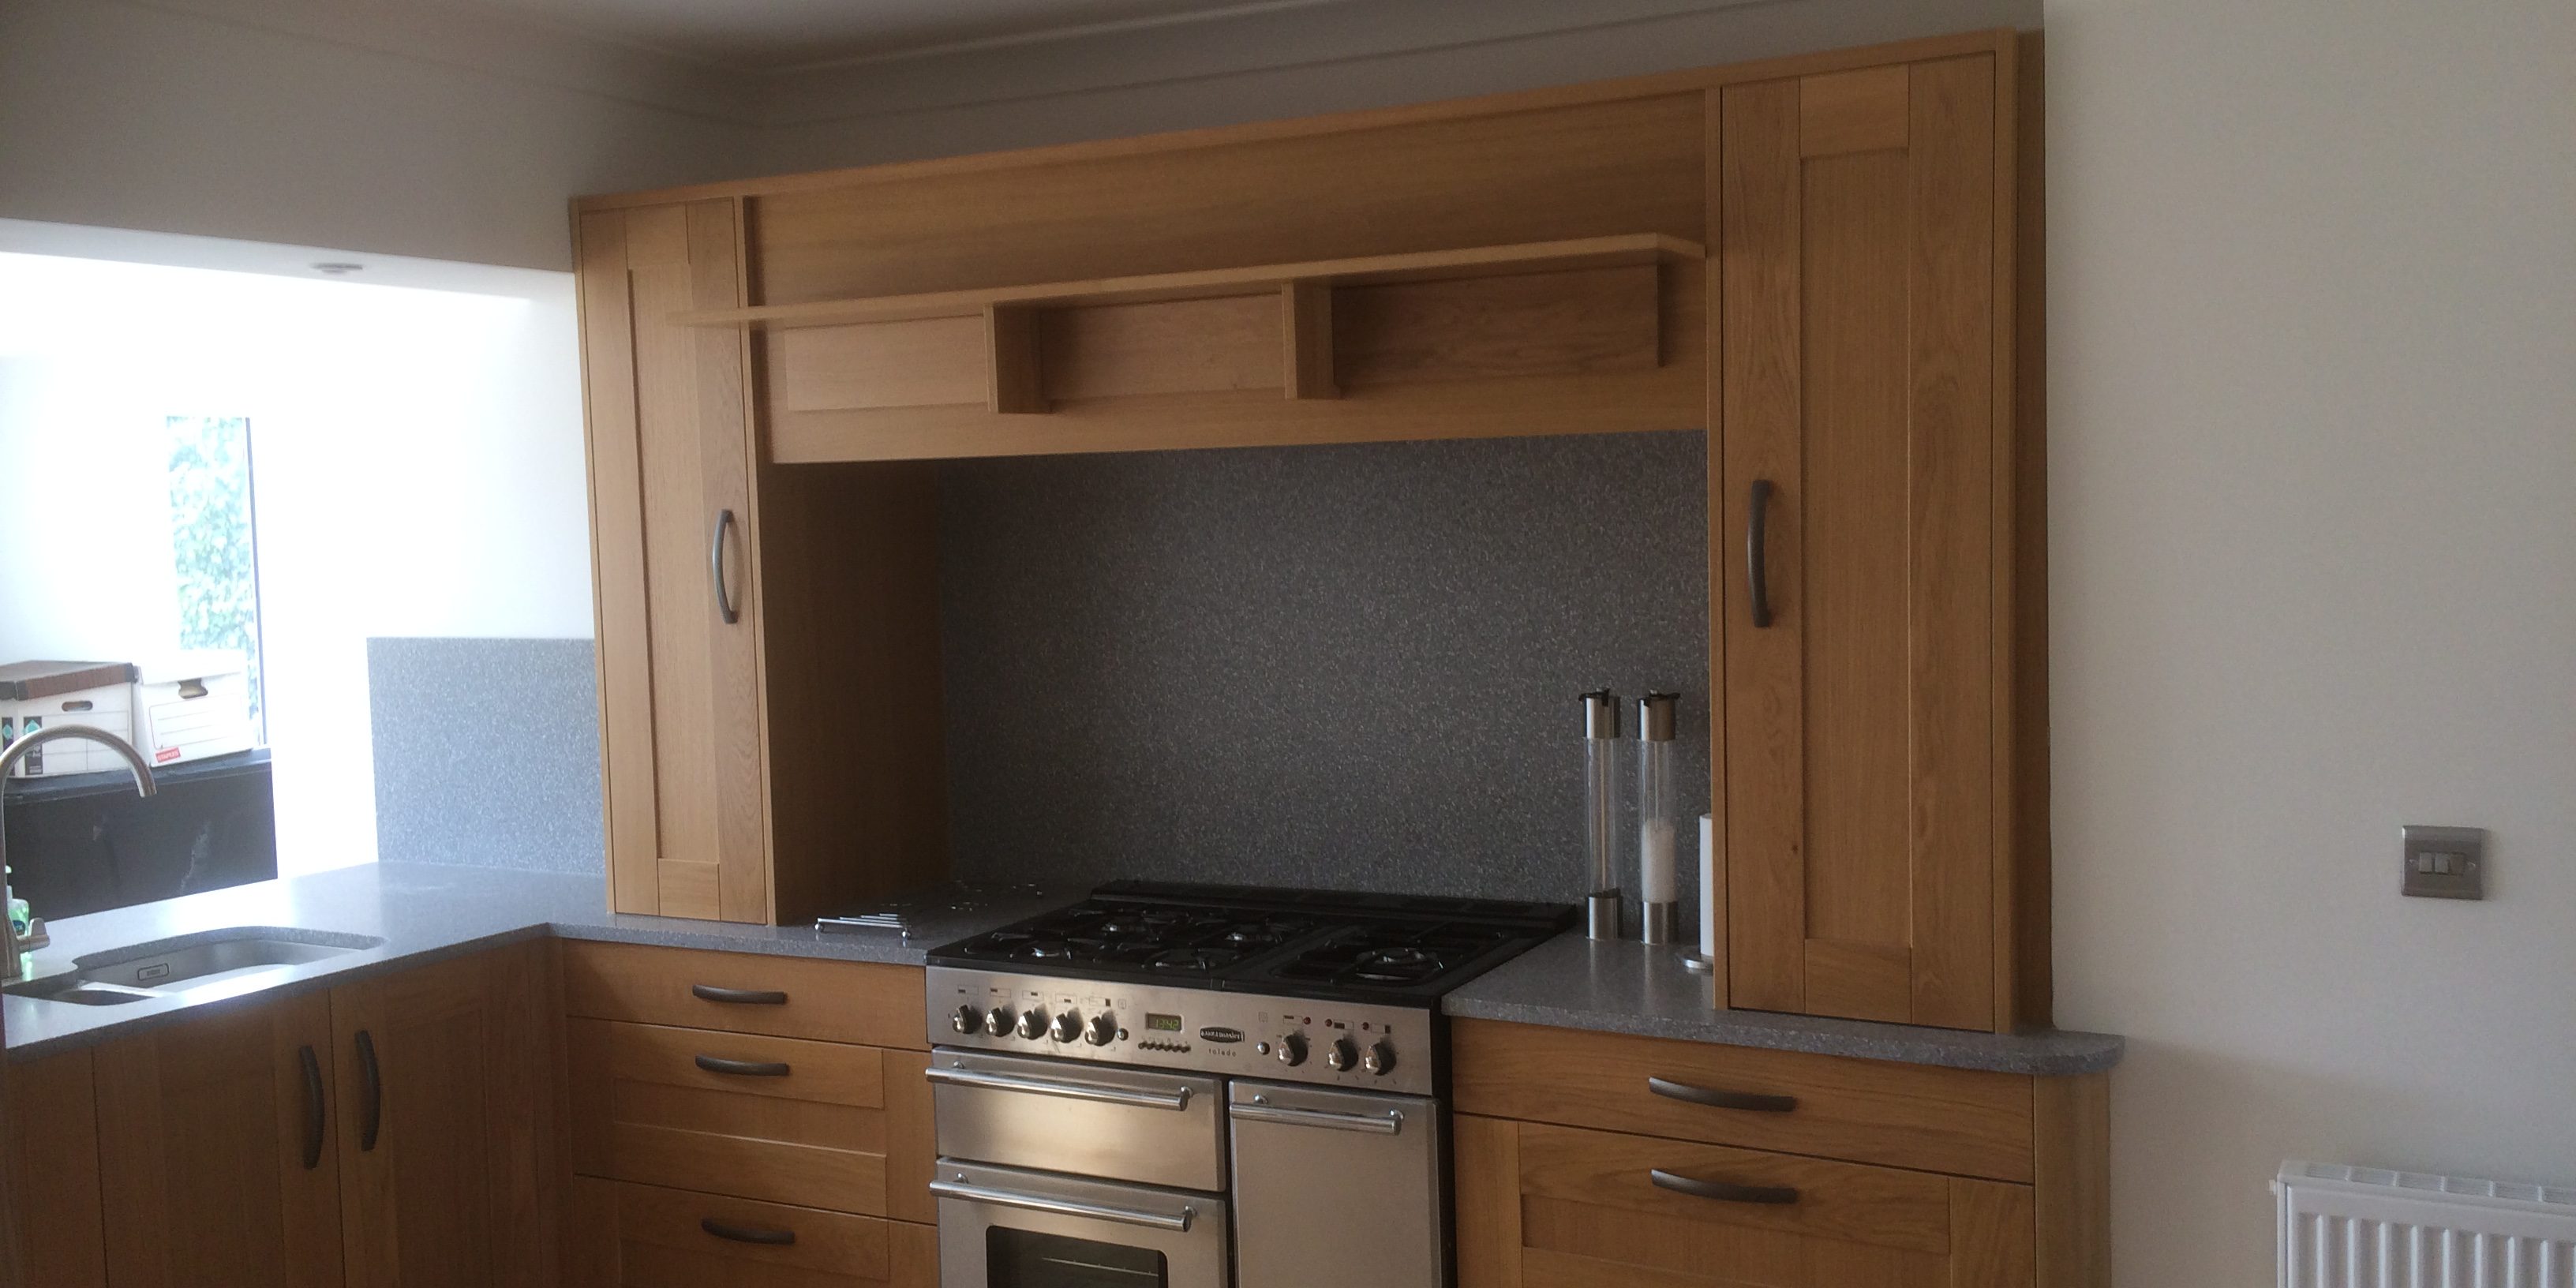 Solid Wood Shaker Door With Solid Surface Minerva Tops Rf Installations Chesterfield Kitchens